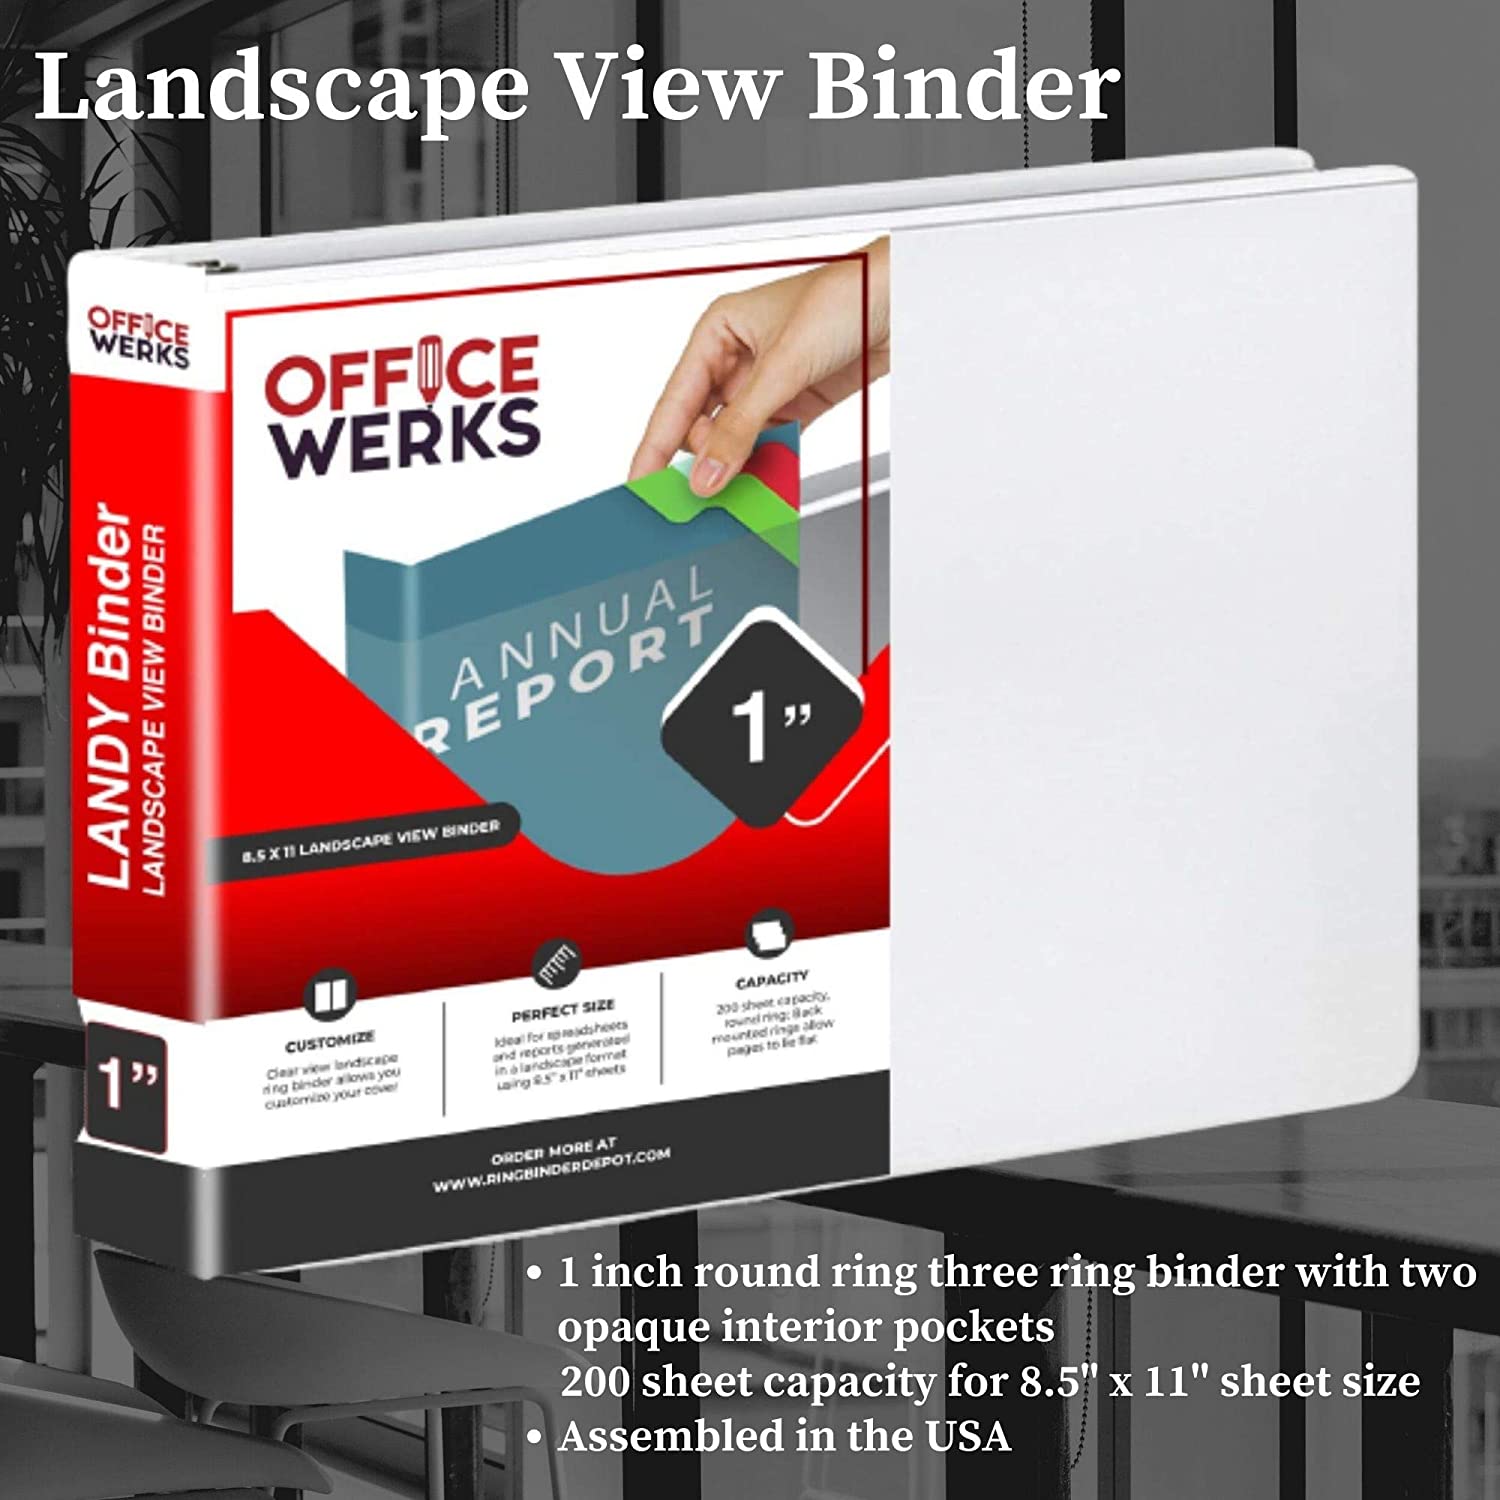 Landscape View Binder, 8.5" X 11", 1 Inch Round Ring, Back Mount, White - Pack of 1